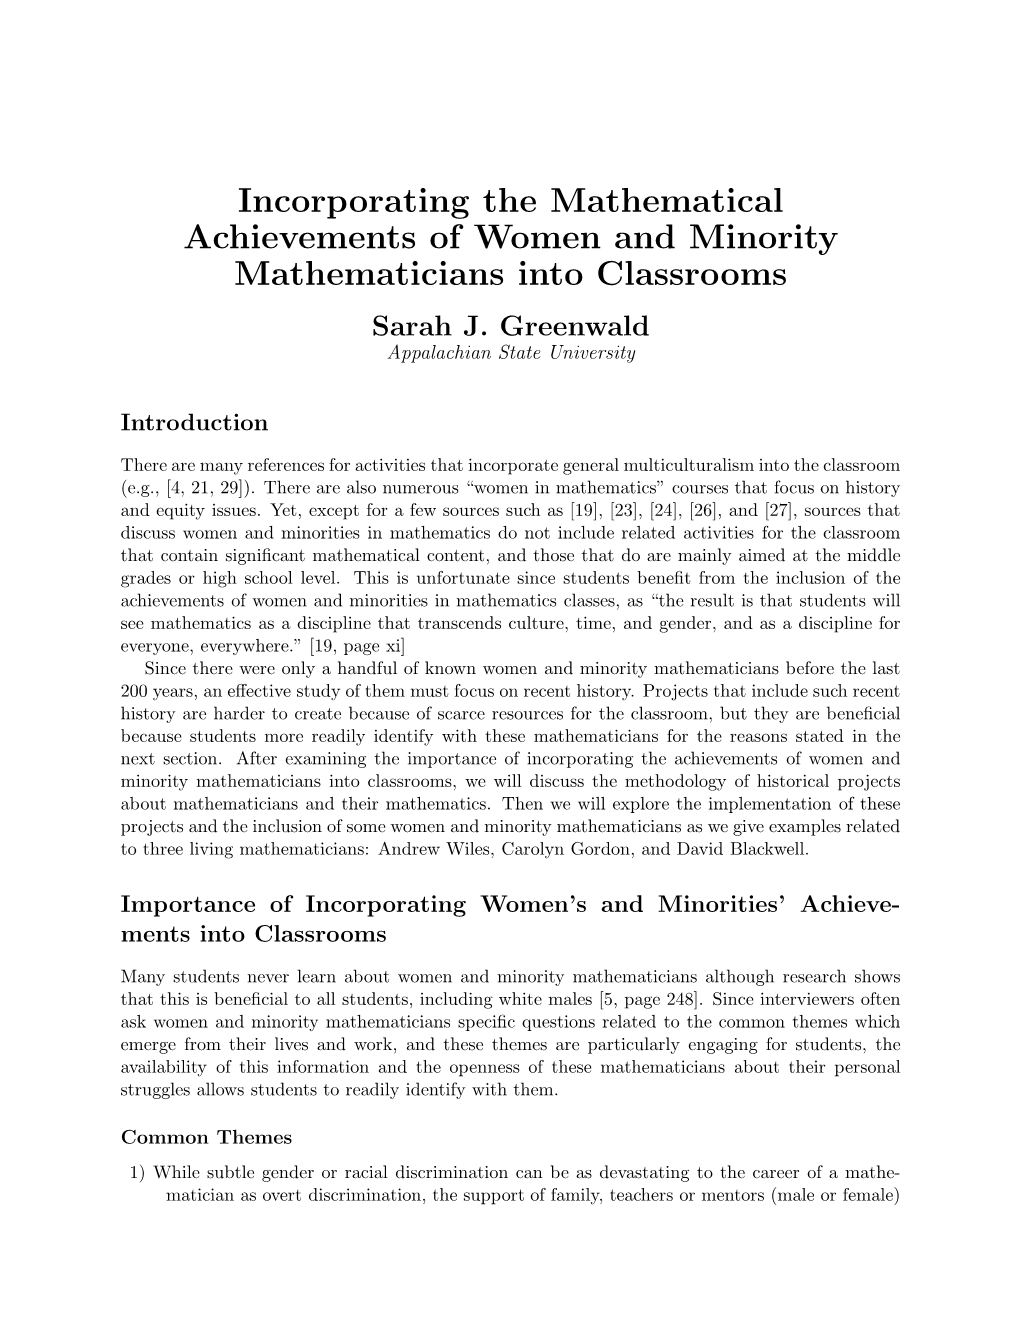 Incorporating the Mathematical Achievements of Women and Minority Mathematicians Into Classrooms Sarah J